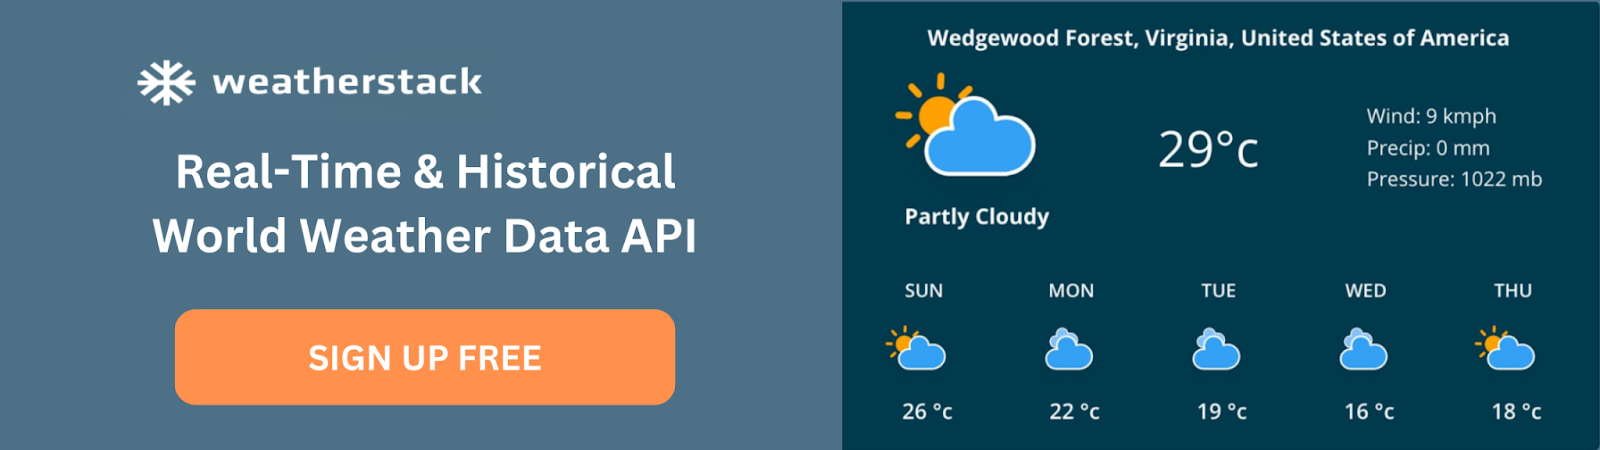 Weatherstack - Real-Time & Historical World Weather Data API - CTA Banner - Sign Up Free